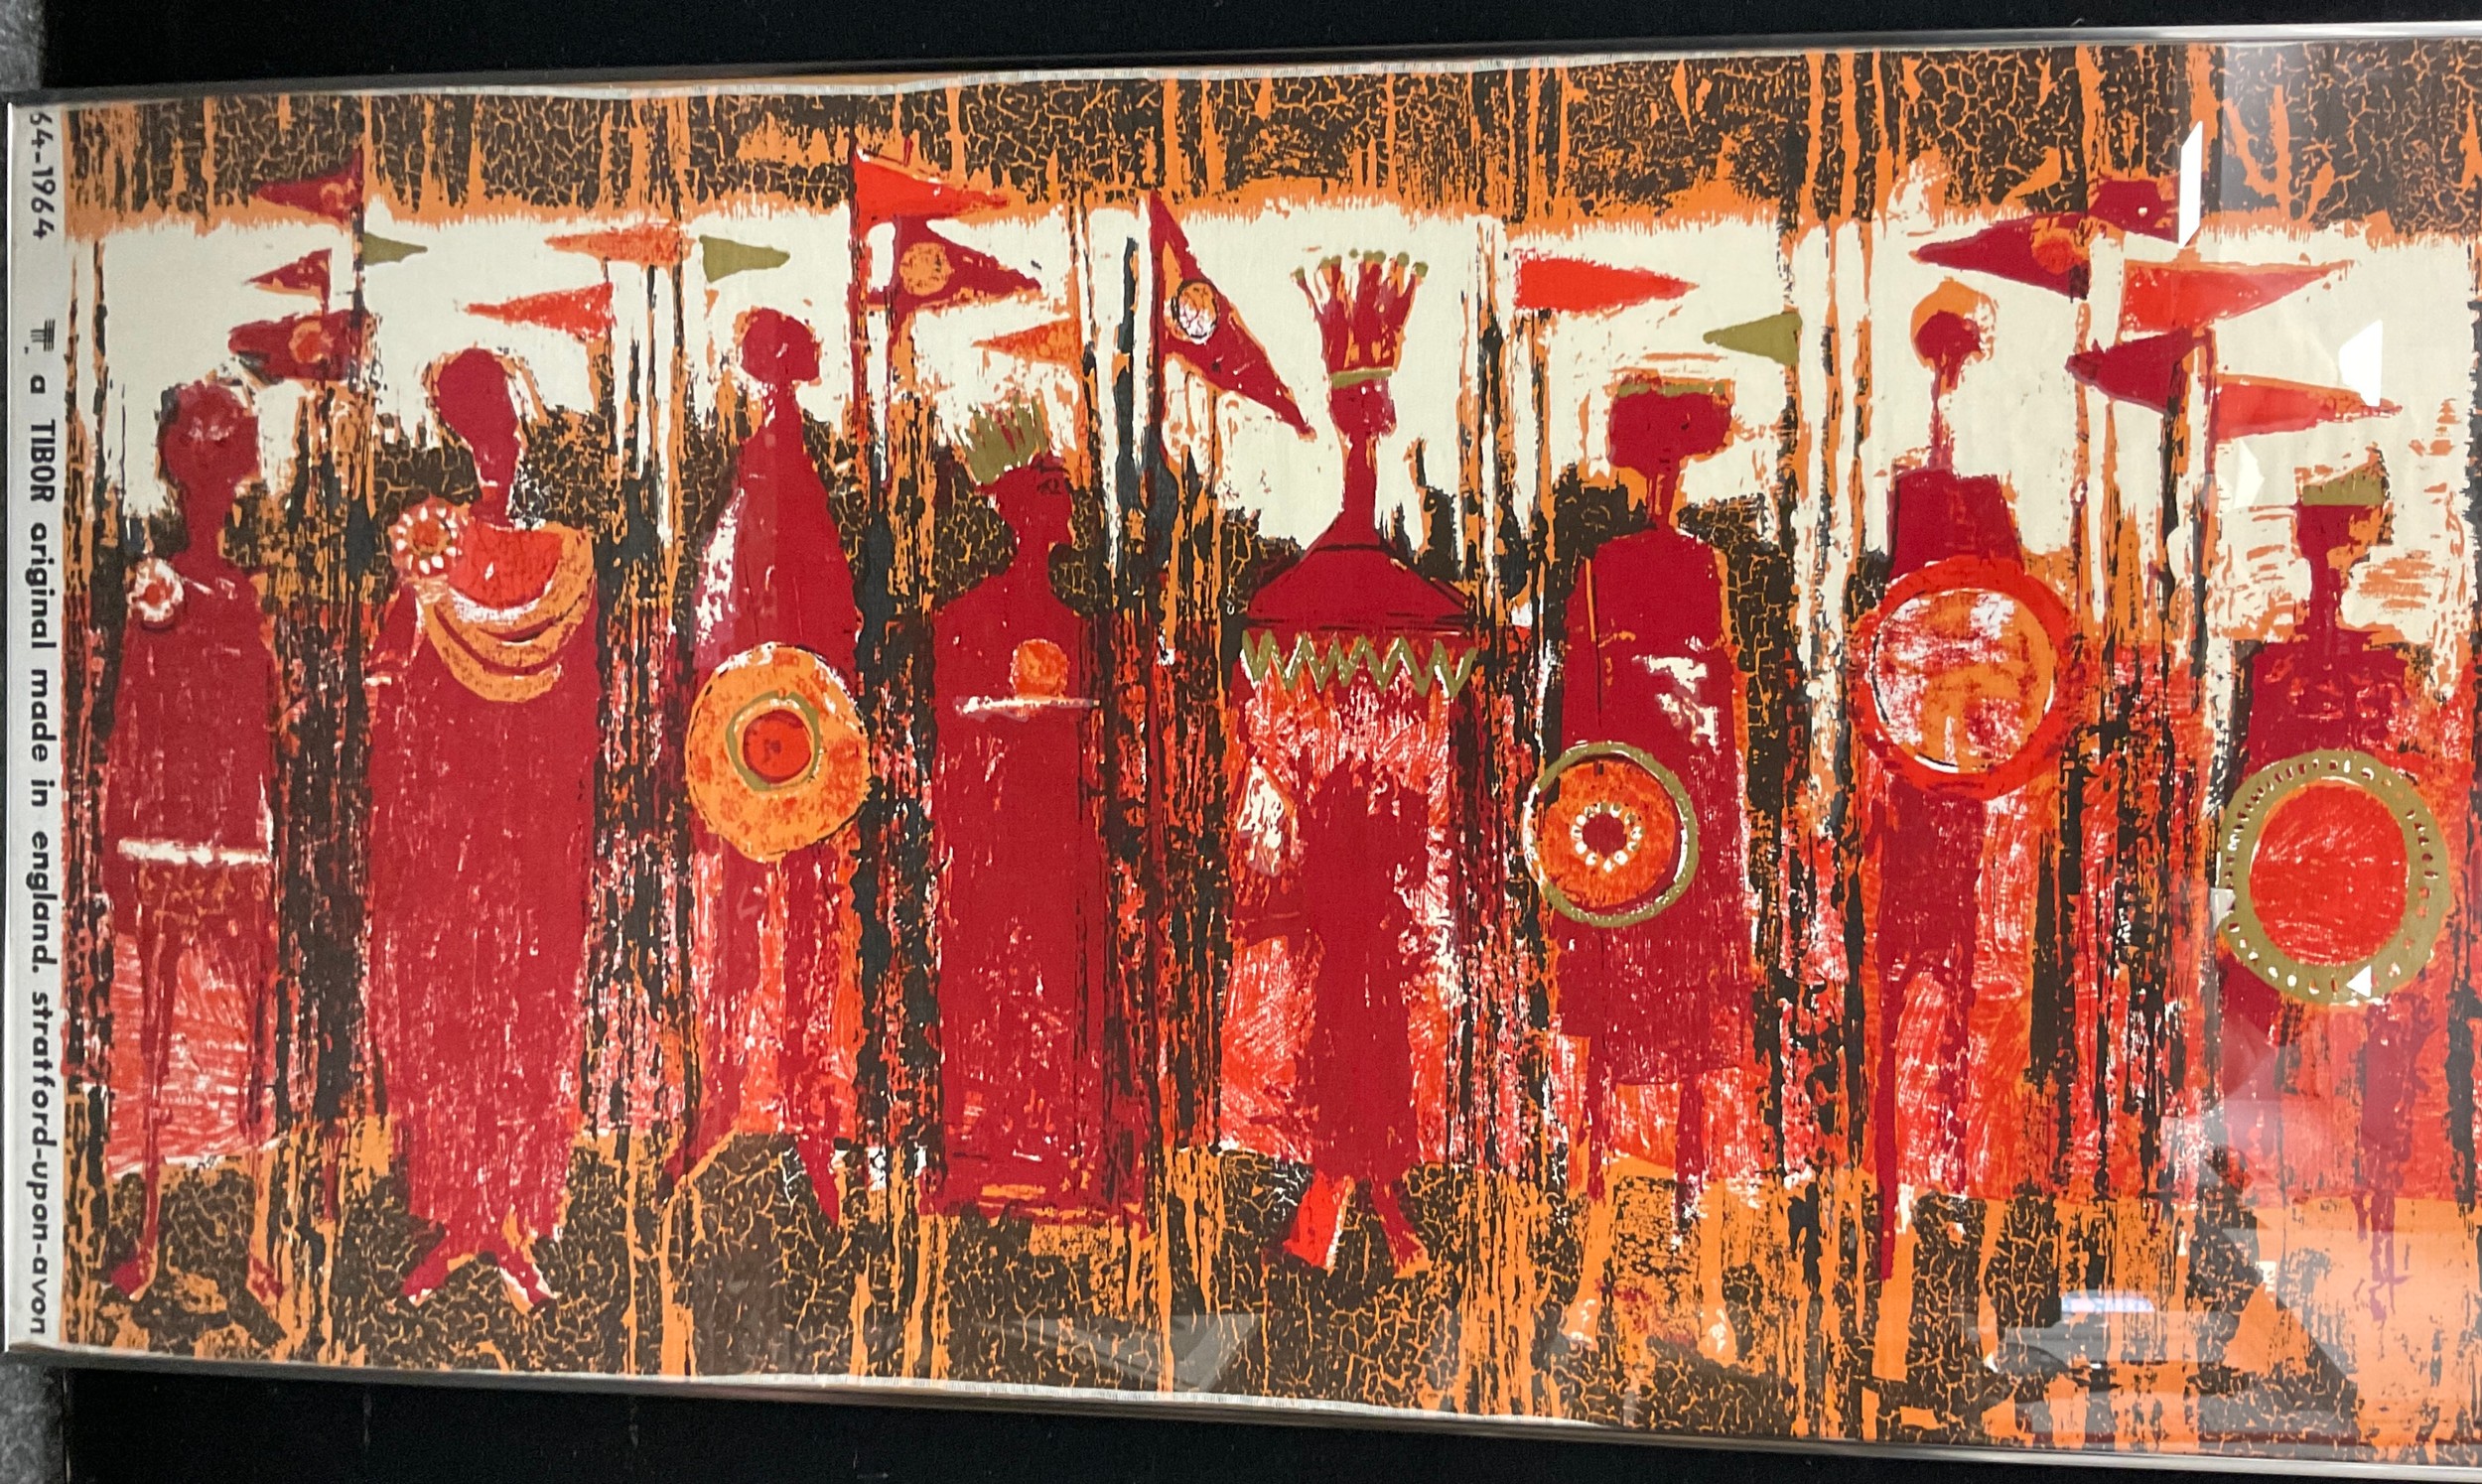 Tibor Reich (1916-1996), 'Age of Kings', designed in 1964, screen printed cotton textile, 63 x